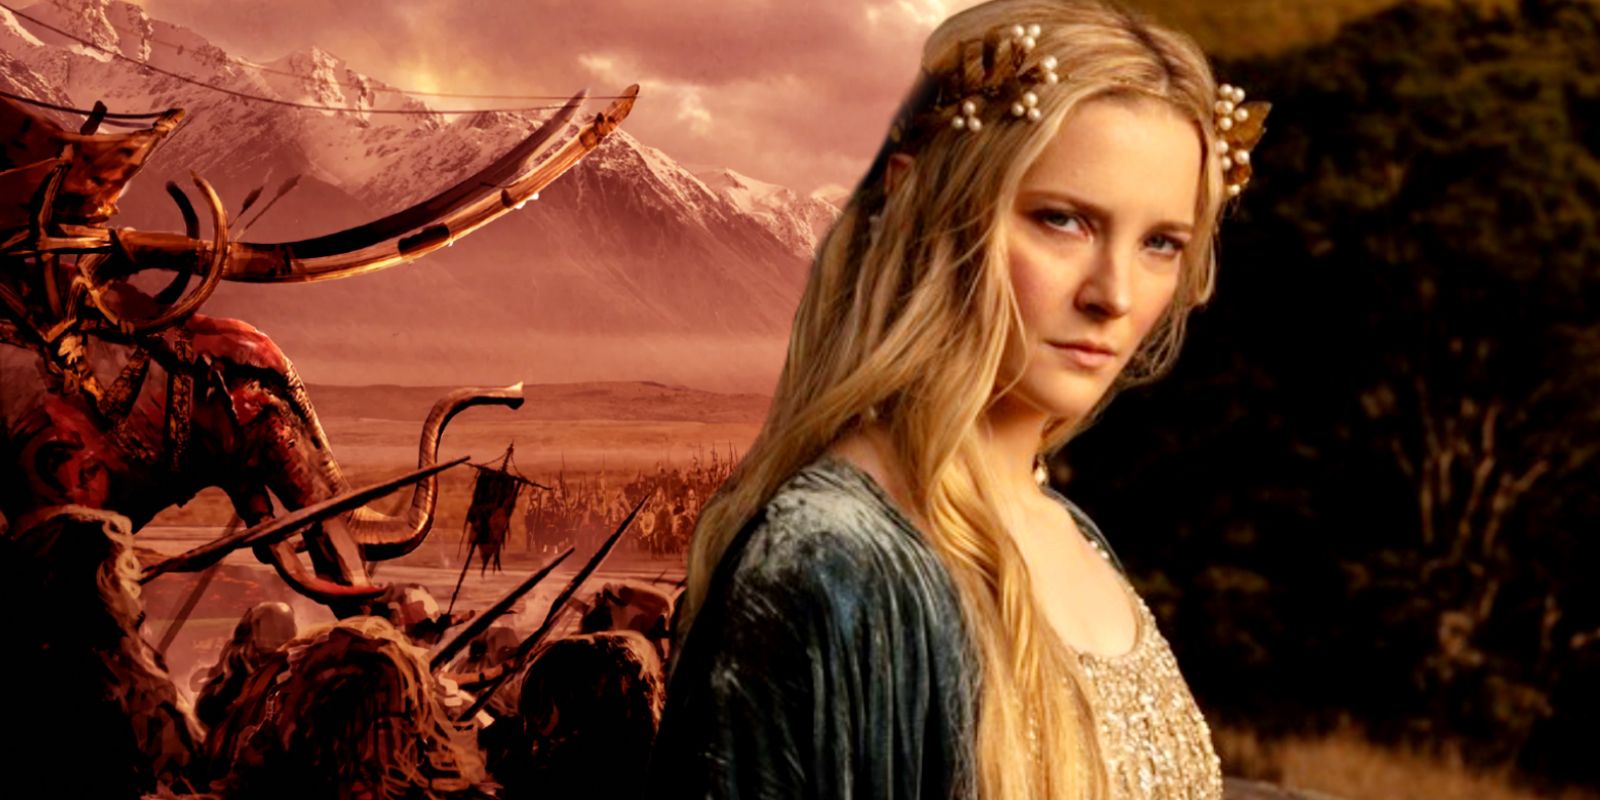 Lord Of The Rings’ New Movie Continues A 12-Year Franchise Trend (& It’s Not Likely To End)